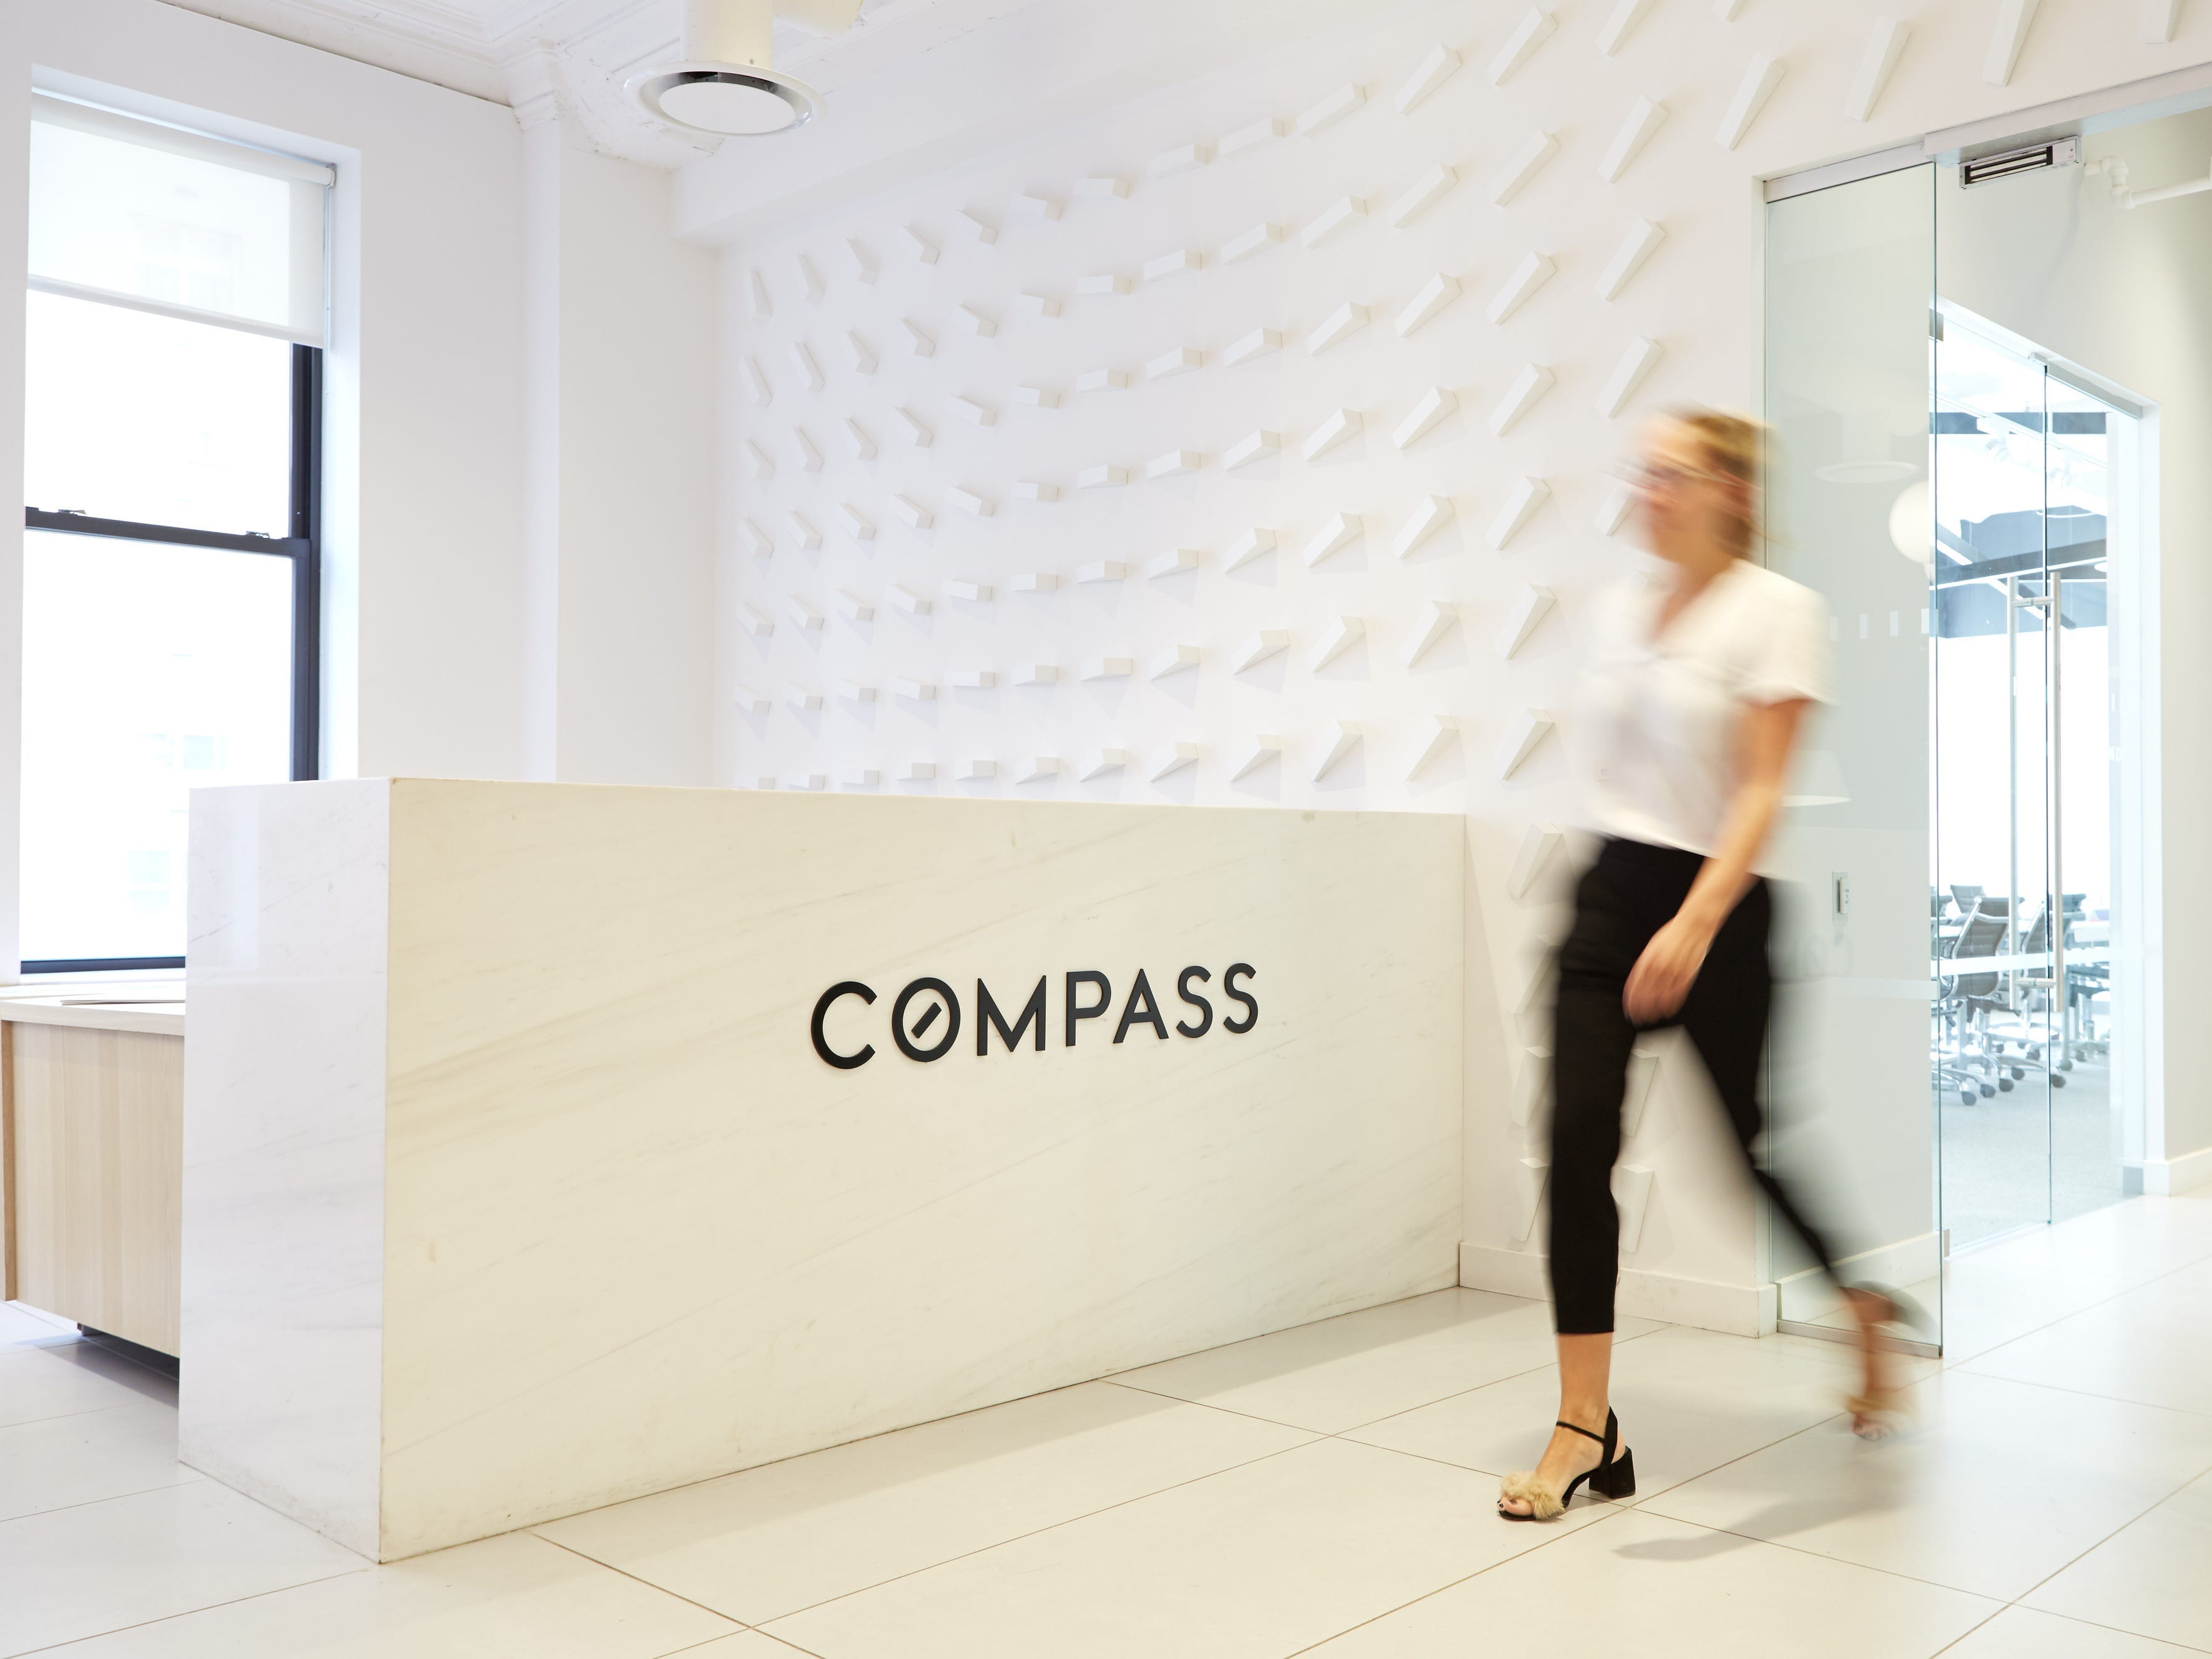 <p><a href="https://www.businessinsider.com/compass-layoffs-robert-reffkin-housing-market-2023-1">Compass CEO Robert Reffkin told staffers</a> on Thursday it would conduct more layoffs, following two previous rounds in the past eight months, as the brokerage continues to struggle with significant financial losses. </p><p>"We've been focused over the last year on controlling our costs," Reffkin wrote in an email to employees. "As part of that work, today we reduced the size of some of our employee teams. While decisions like these are always hard, they are prudent and allow us to continue to build a long-term, successful business for all of you."</p><p>While the size of the layoffs was not immediately disclosed, the brokerage let go of 450 corporate employees in June 2022, followed by an additional 750 people from its technology team in October 2022. </p>